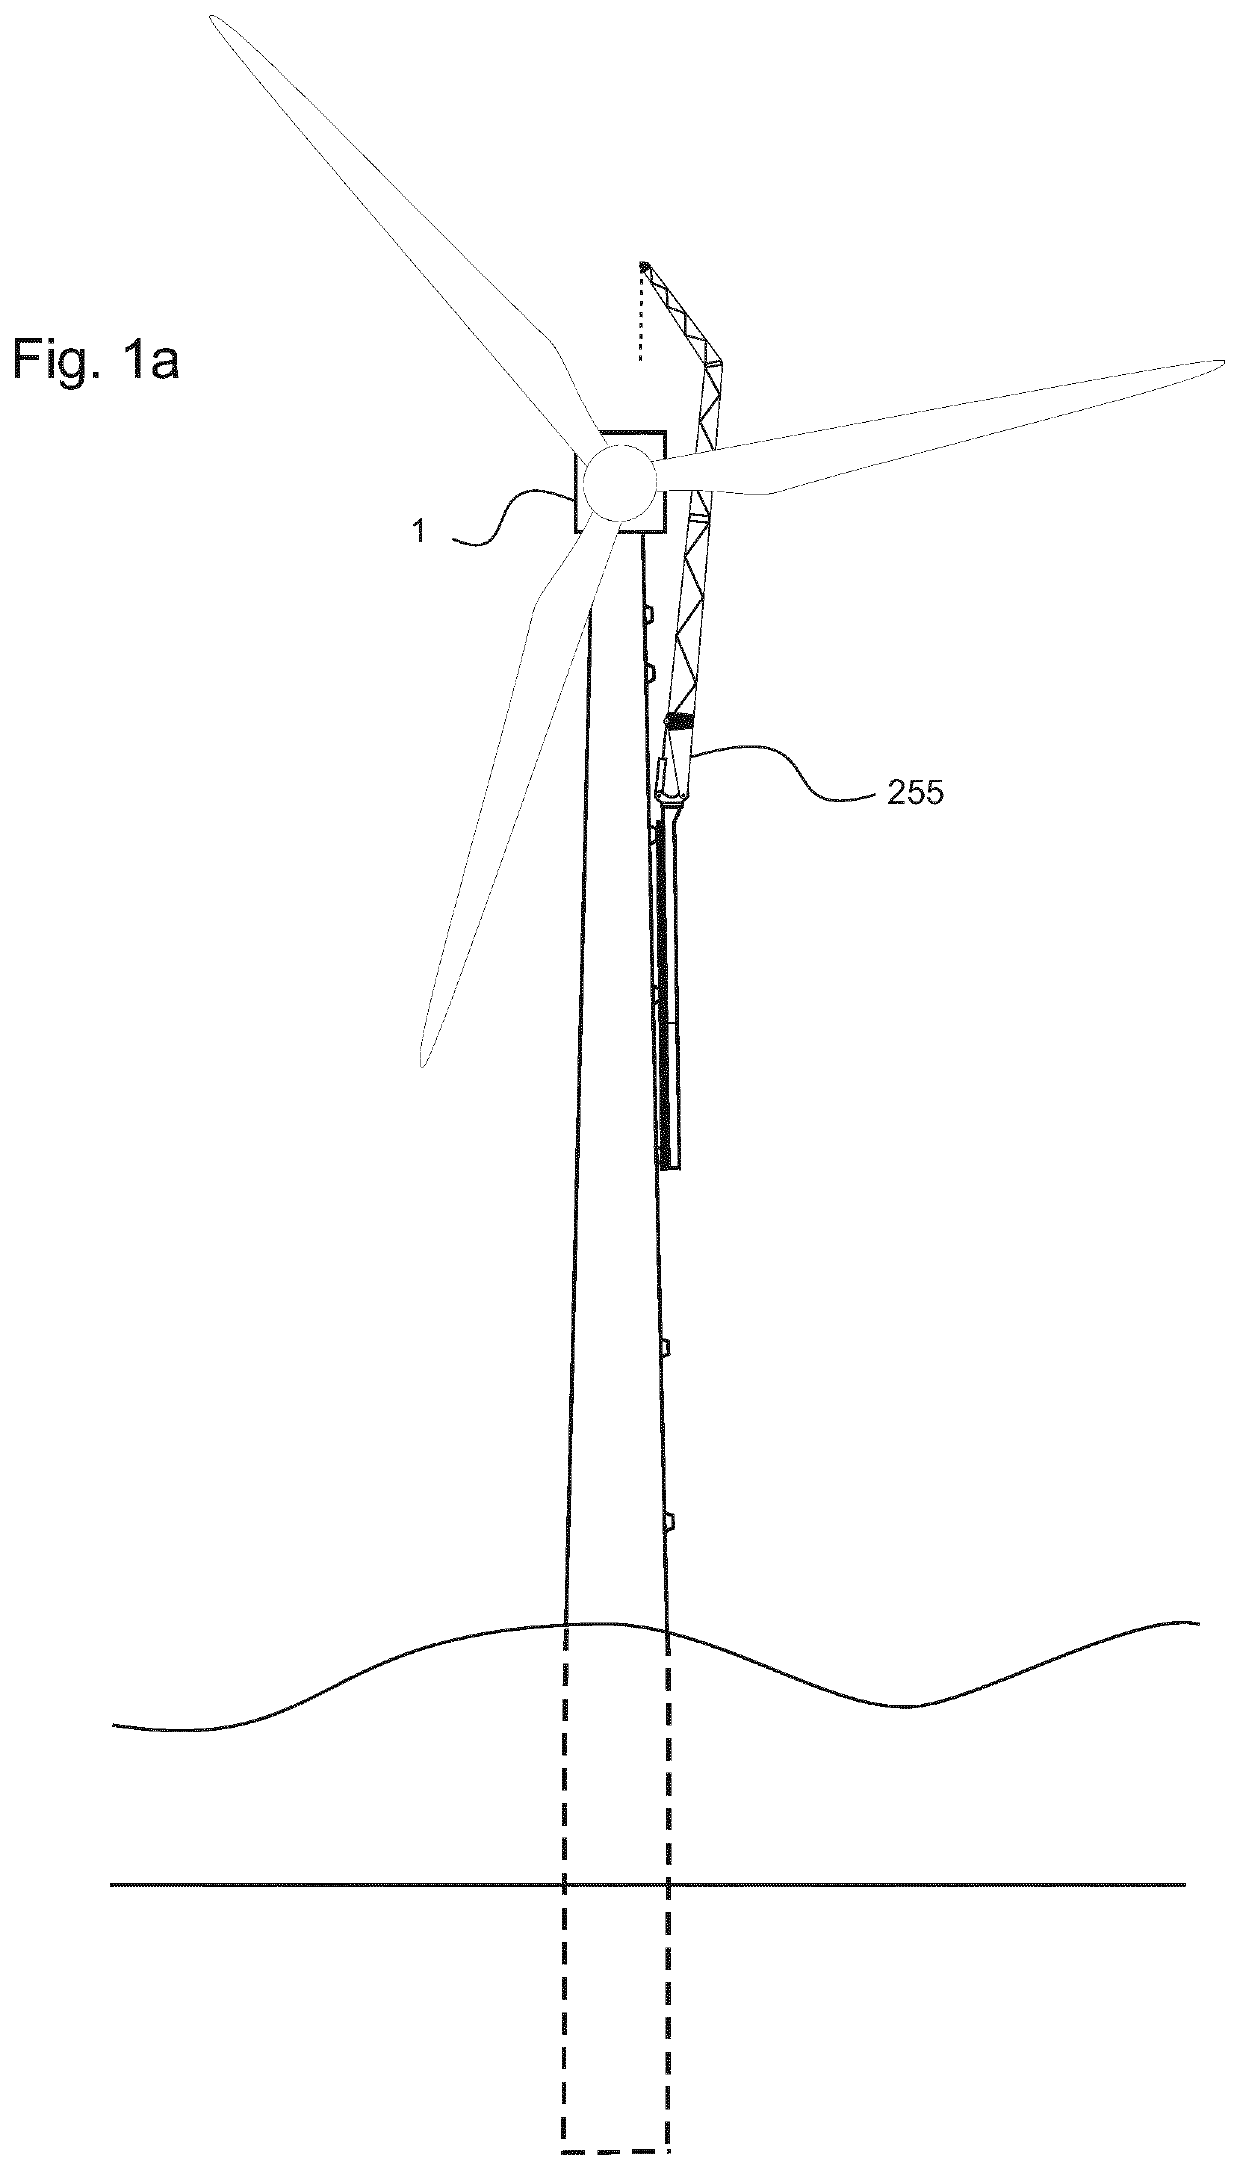 Hoisting system for installing a wind turbine